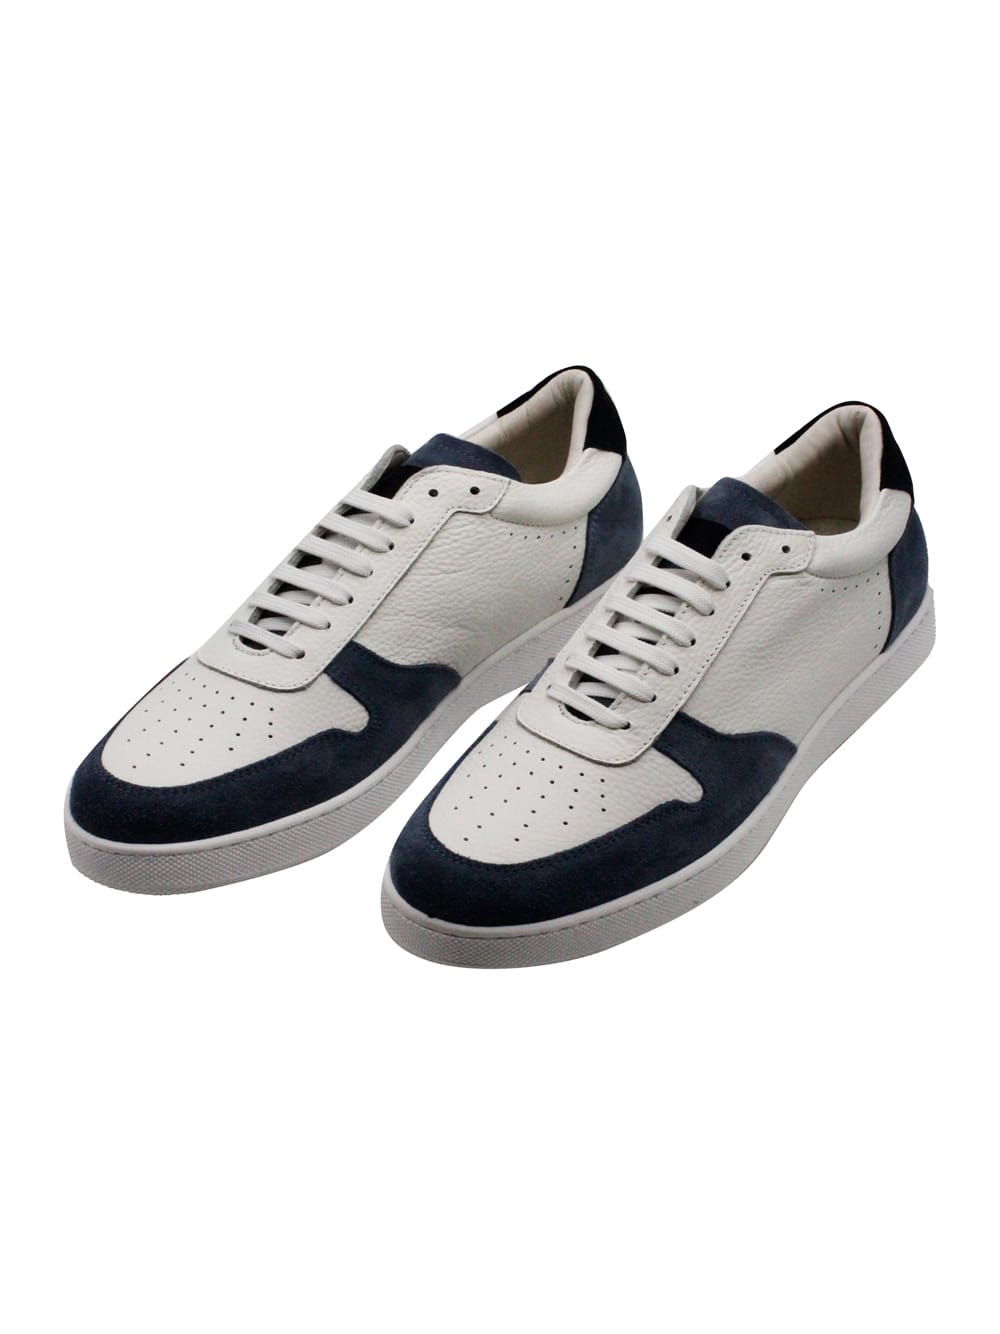 Shop Barba Napoli Sneakers In Soft And Fine Leather With Contrasting Color Suede Details With Lace Closure And Suede B In Light Blu